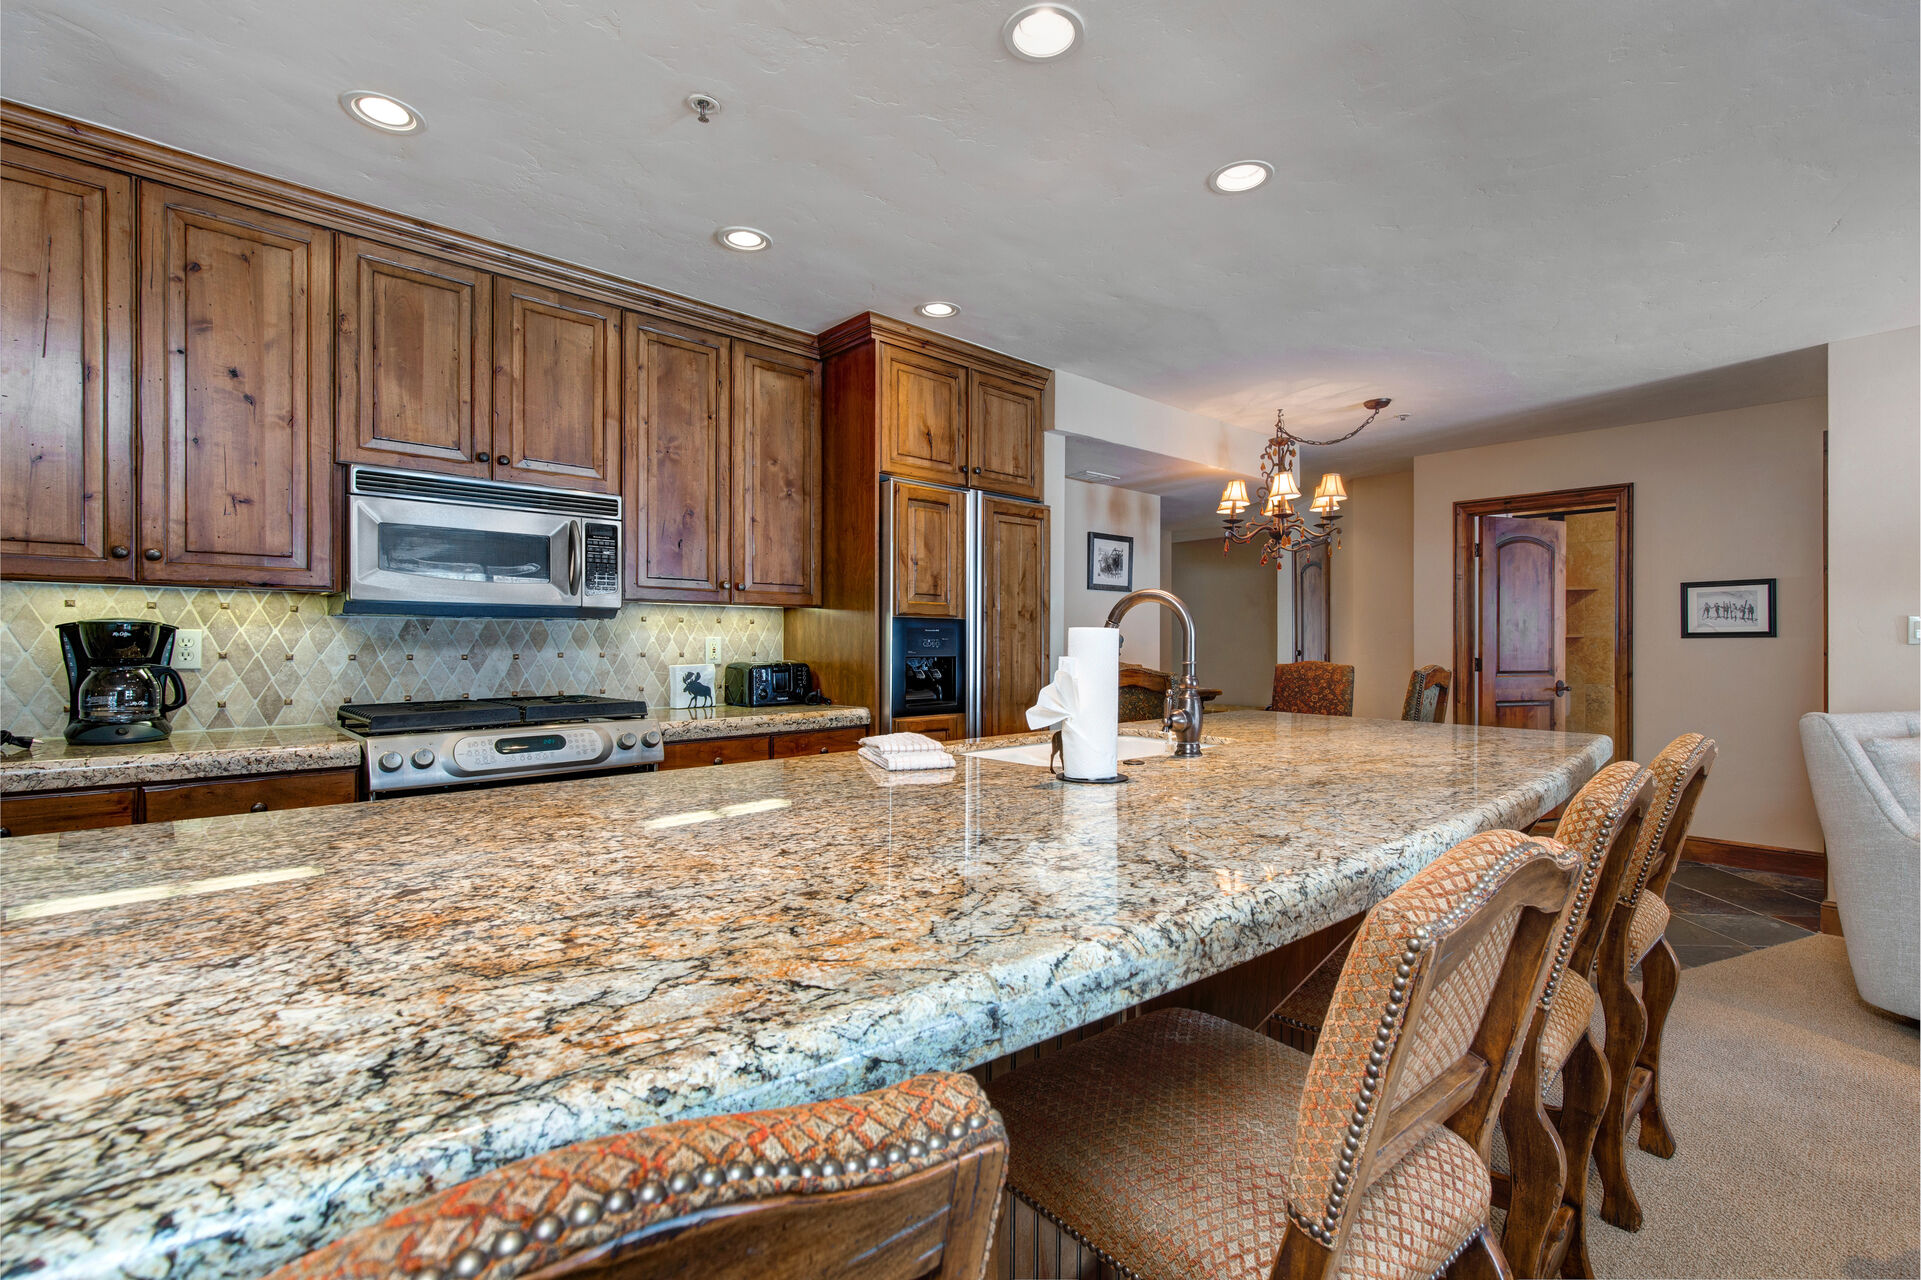 Fully Equipped Kitchen with beautiful stone countertops, stainless steel appliances, ample space, built-in water and ice dispenser, and bar seating for four